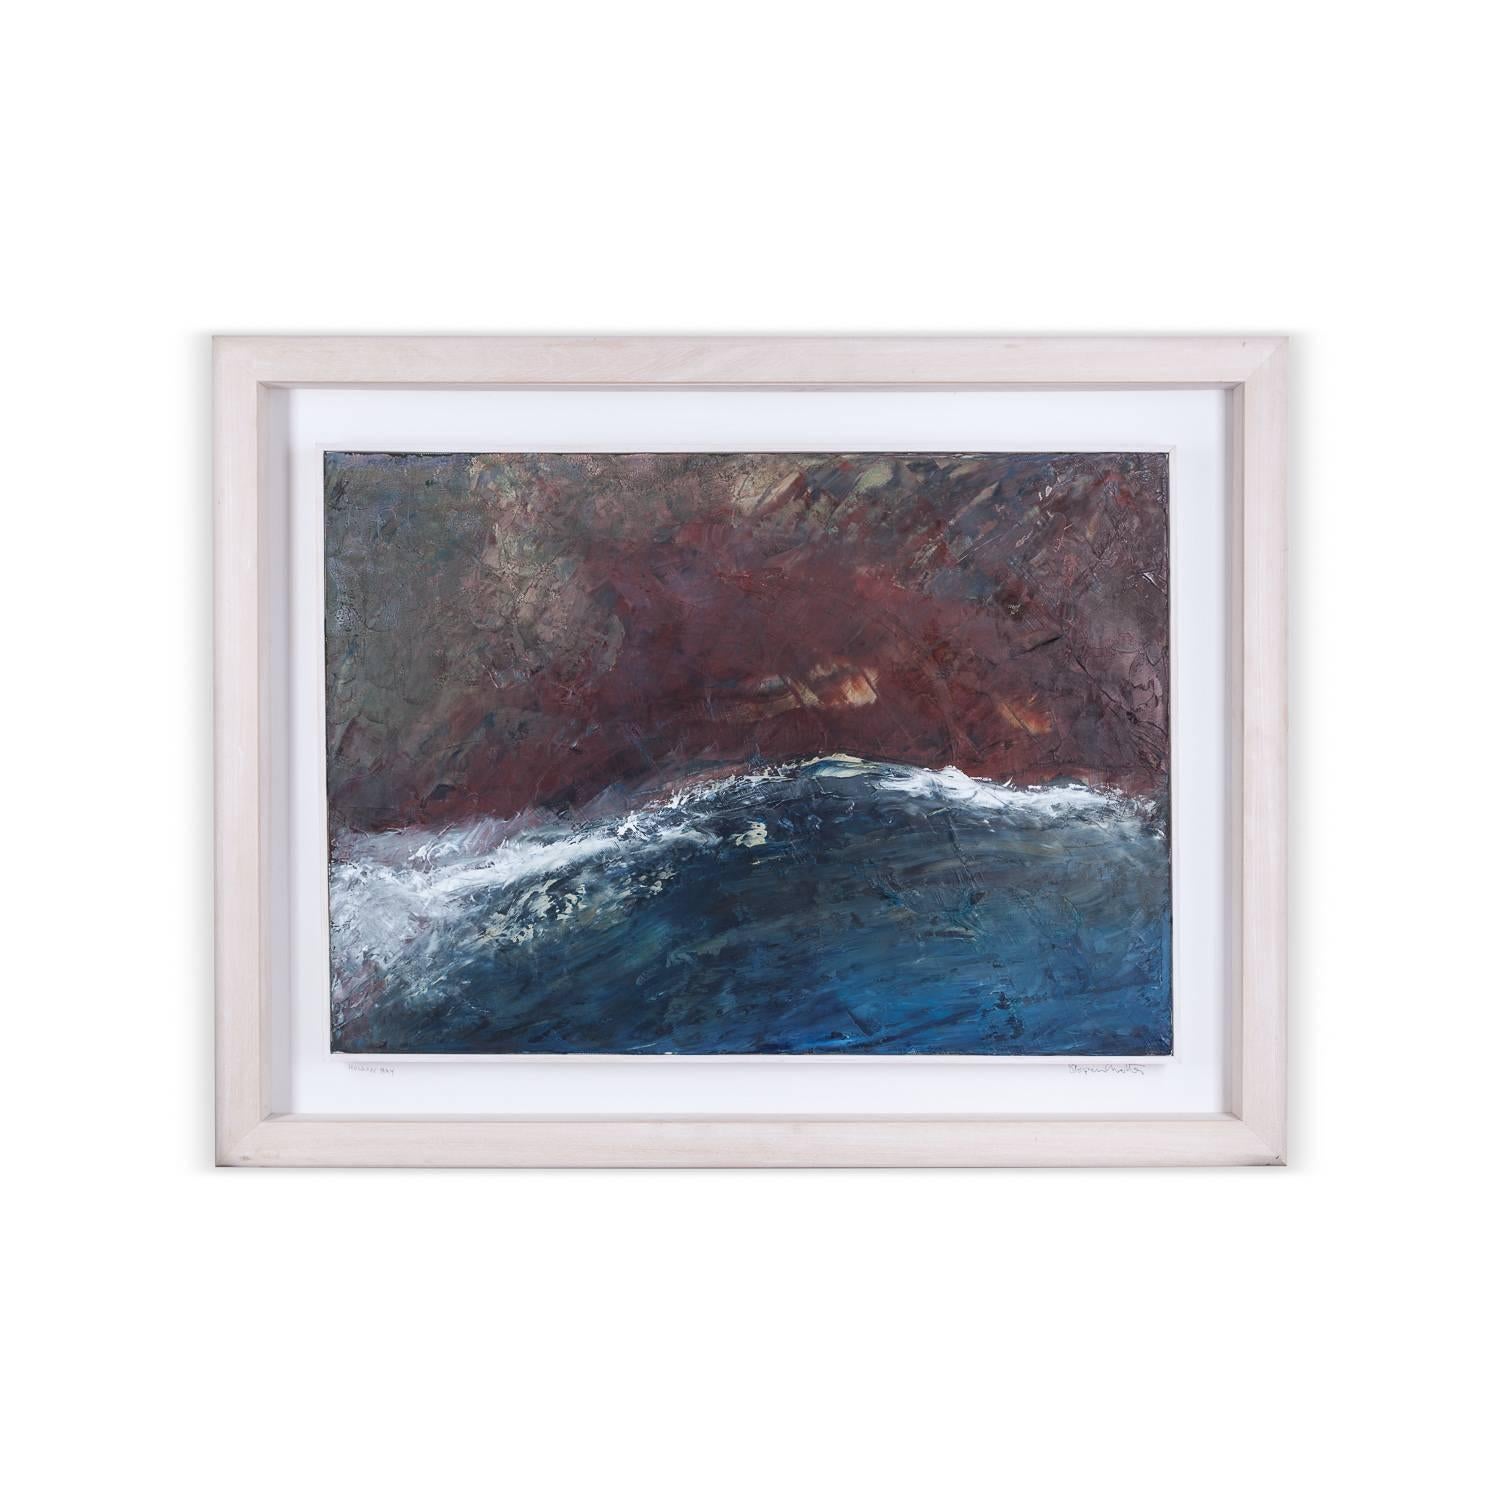 Oil on Canvas by Stephen Charlton.

Stephen is a talented Contemporary Artist and Sculptor whose work has received much acclaim. 

The painting measures 50cm high by 70cm wide, The frame measures 69.5cm high by 90cm wide.